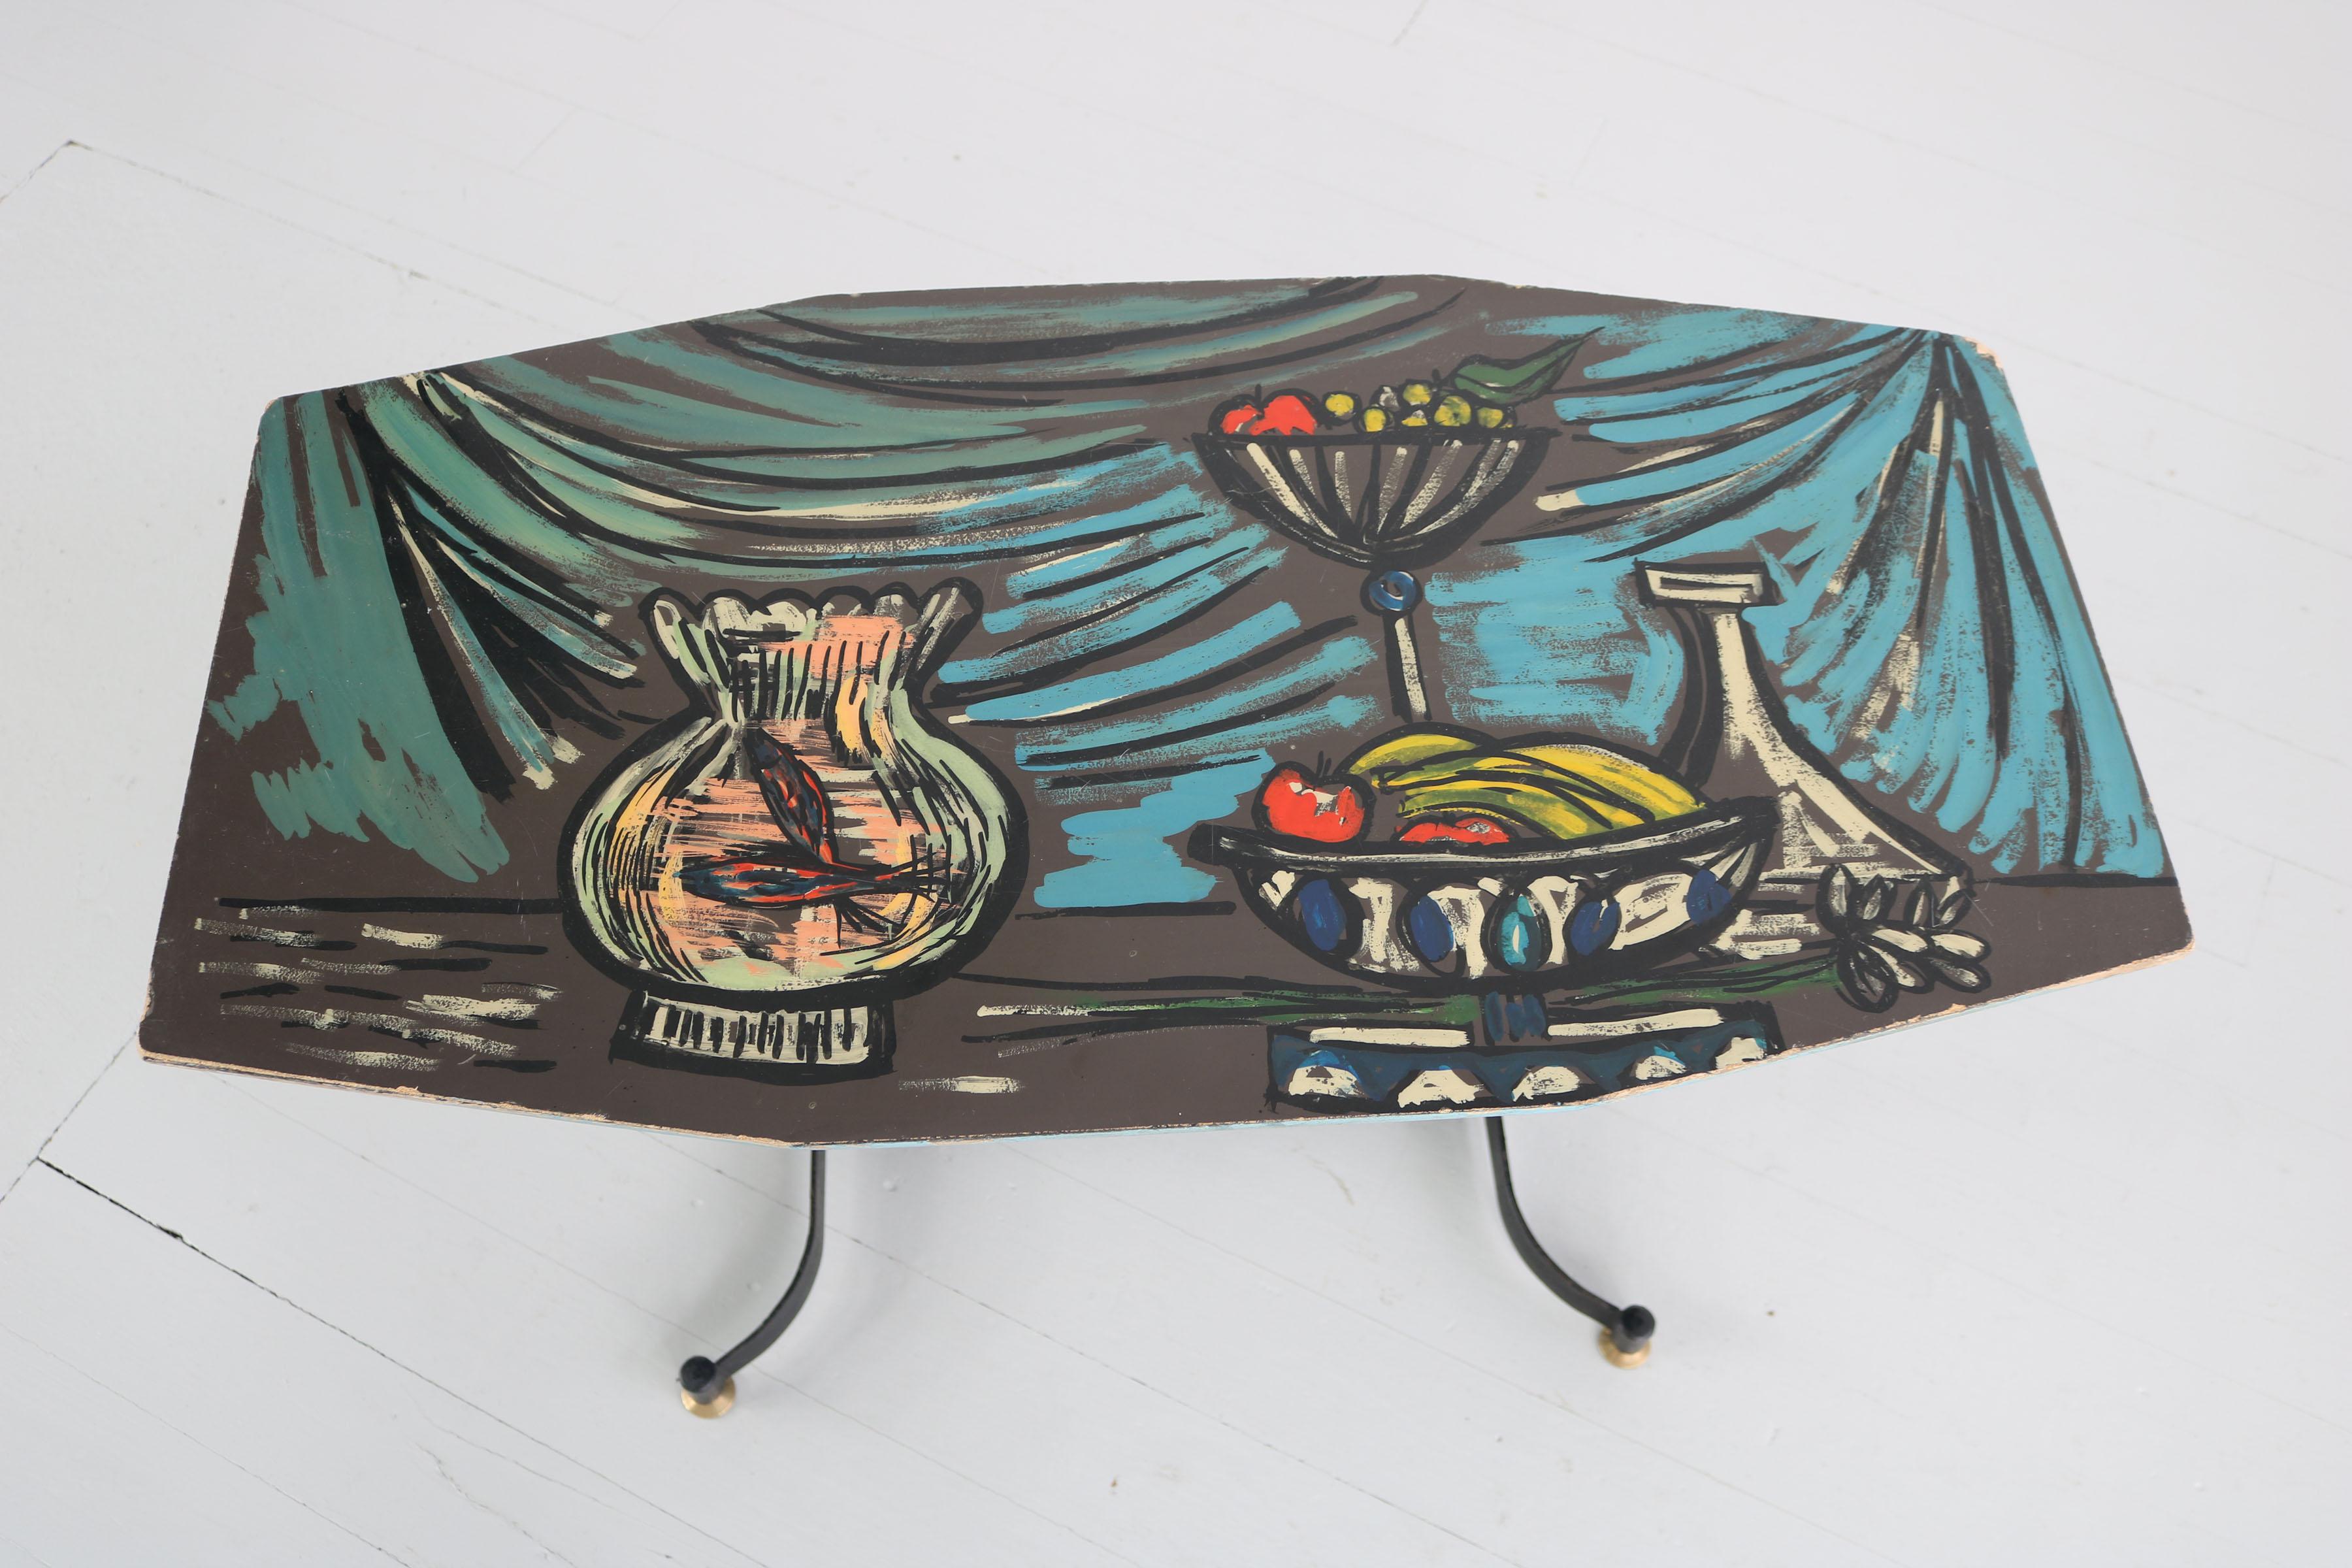 Mid-20th Century Italian Dark Sofa Table with Colorful Hand-Painted Motives on Table Top, 1950s For Sale